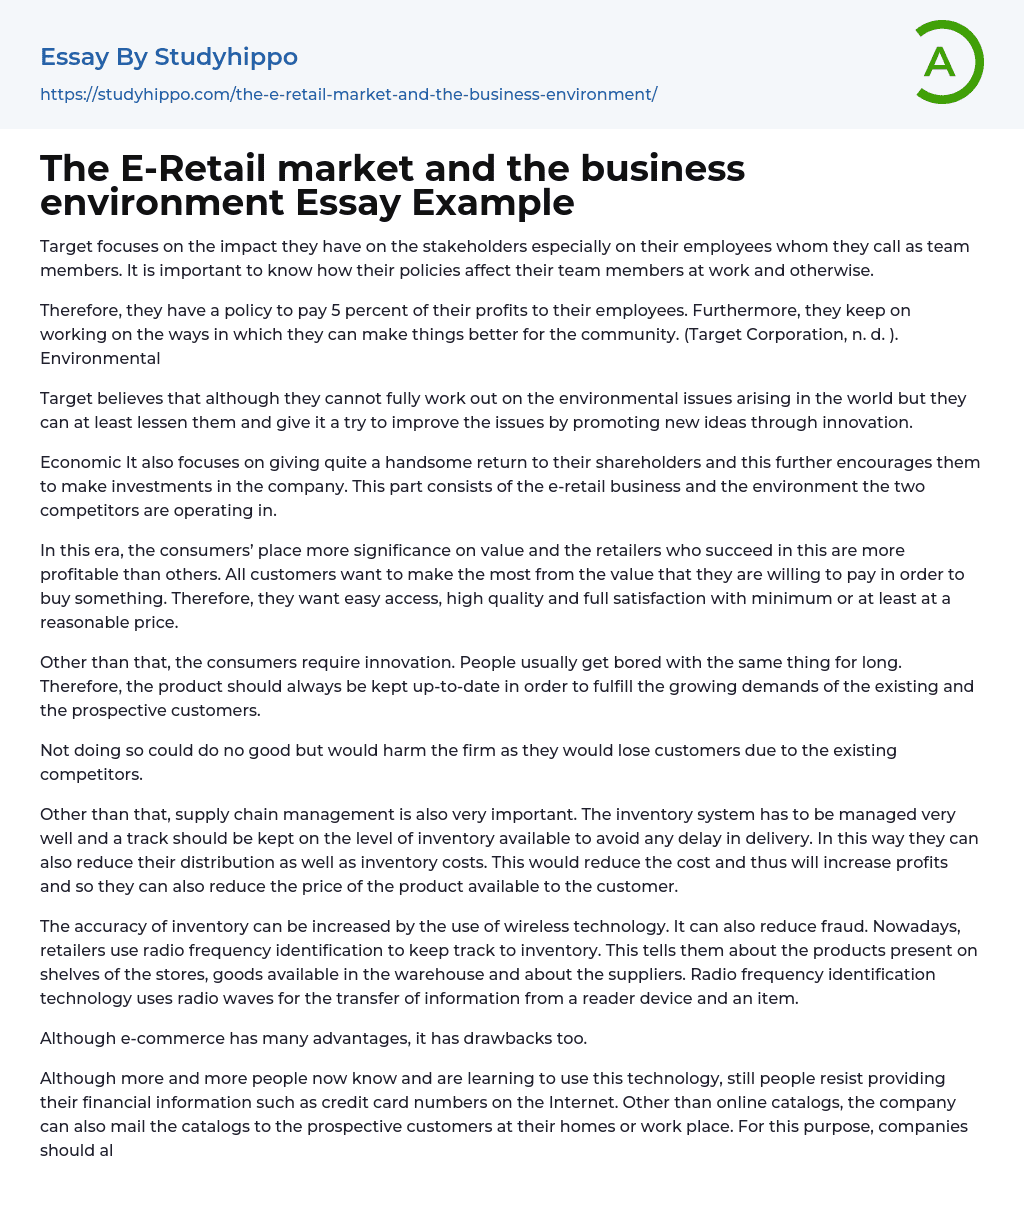 The E-Retail market and the business environment Essay Example